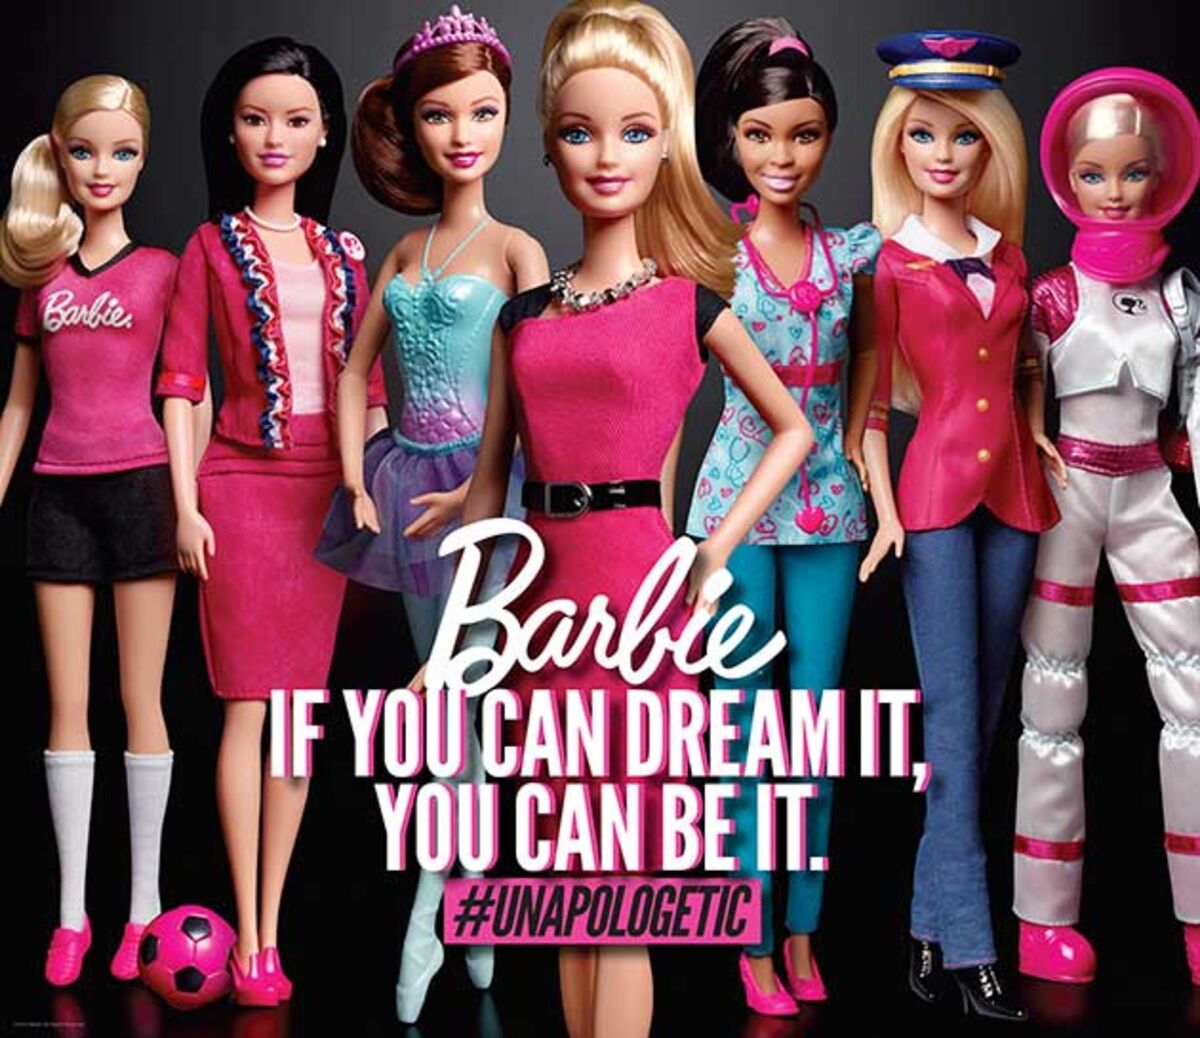 corruptie tofu Permanent Barbie, With #Unapologetic Ads, Leans In Just a Little Bit - Bloomberg